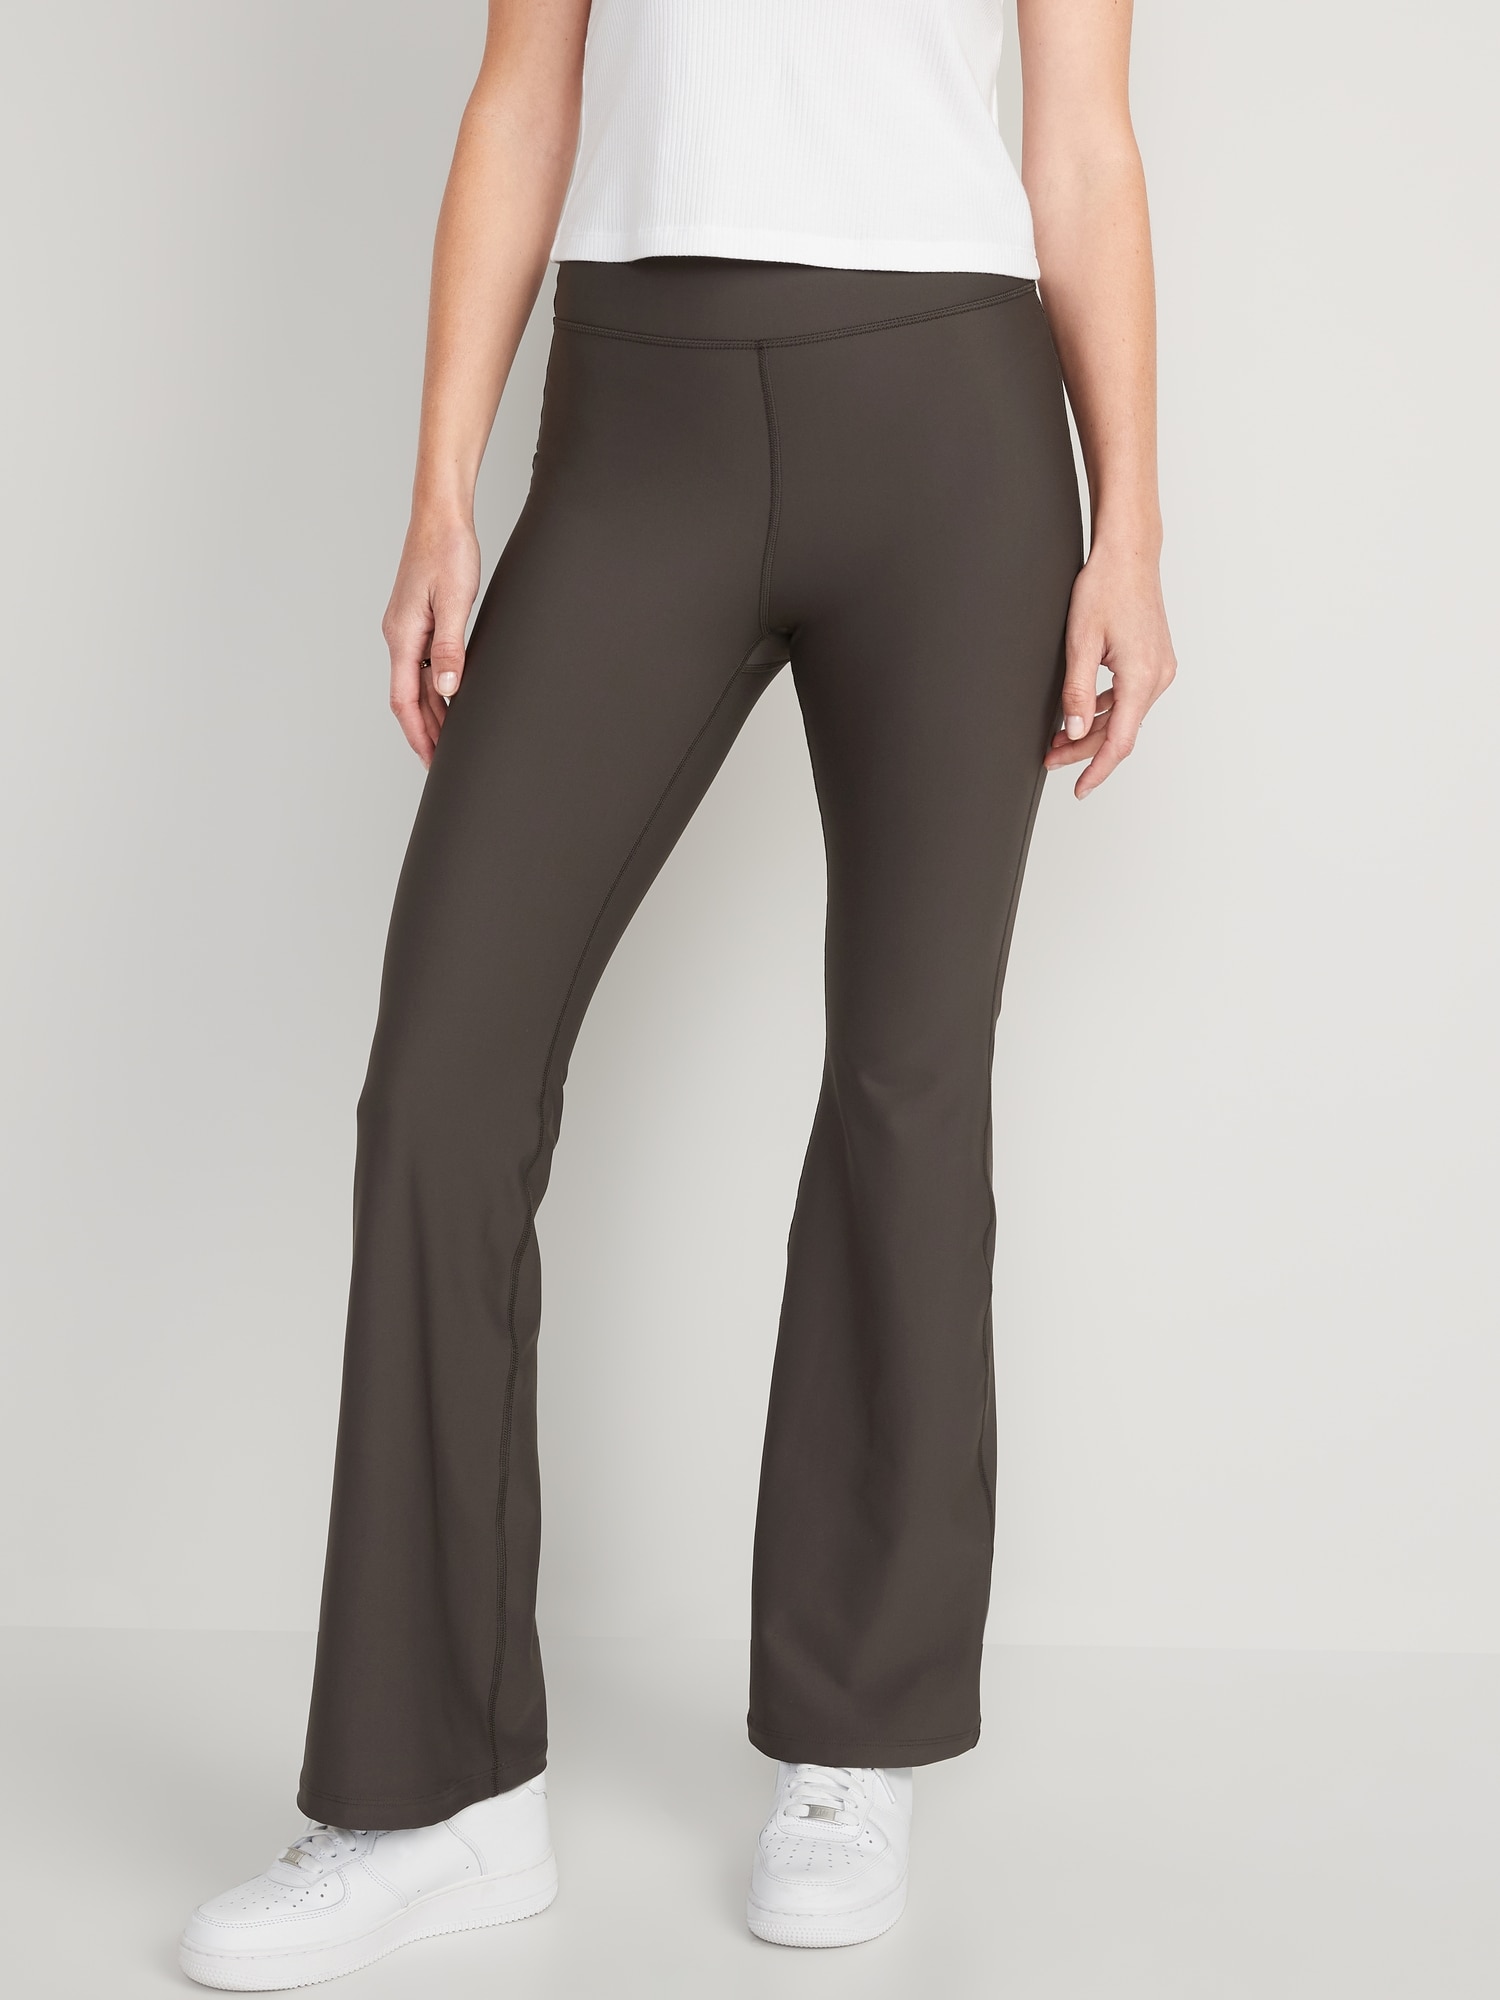 Old Navy Extra High-Waisted PowerSoft Flare Leggings brown. 1